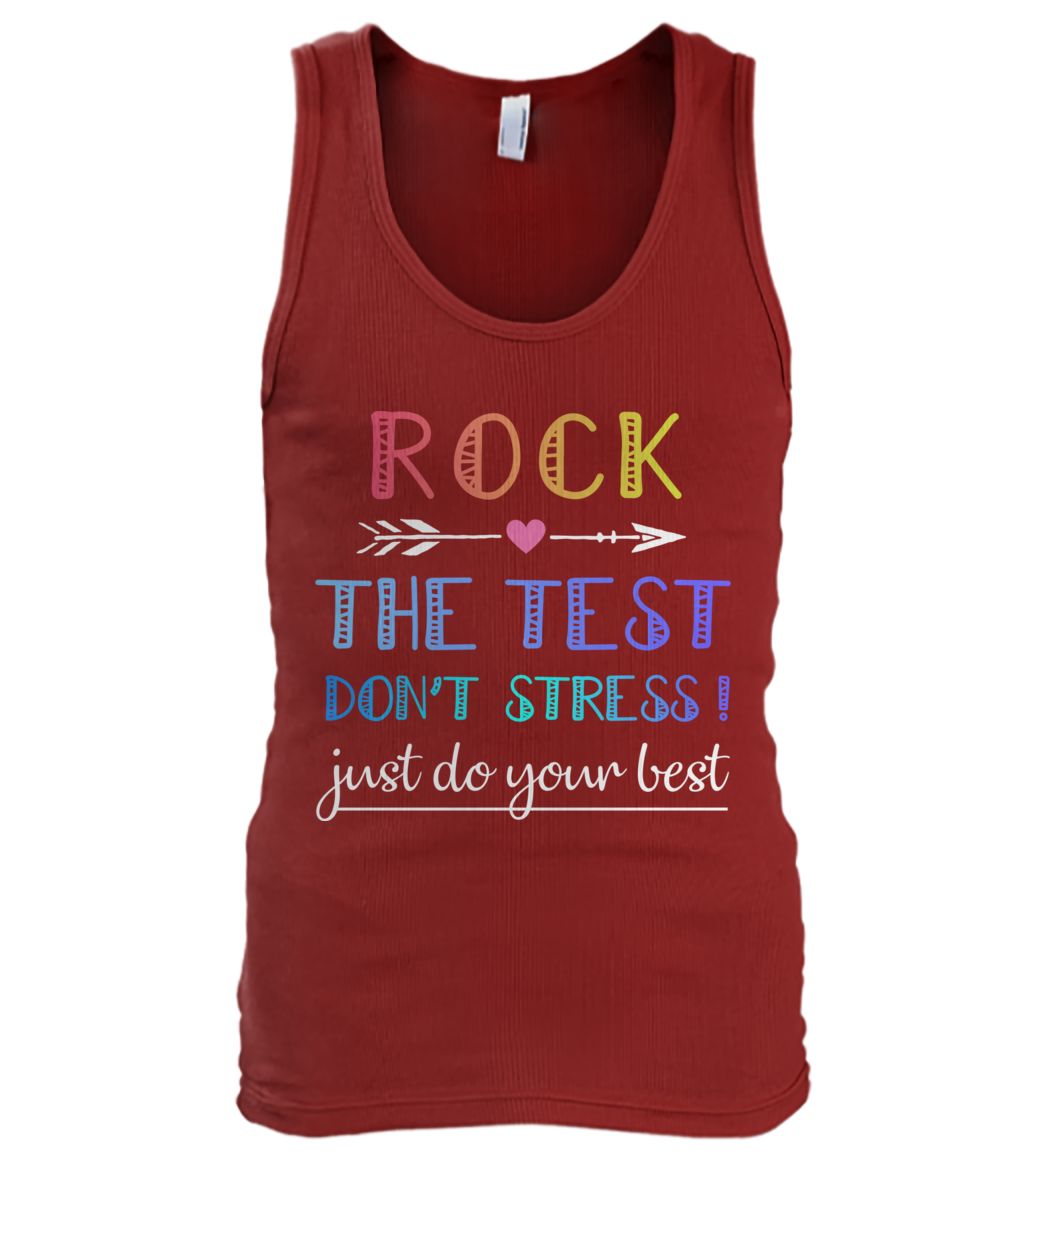 Rock the test don't stress just do your best men's tank top